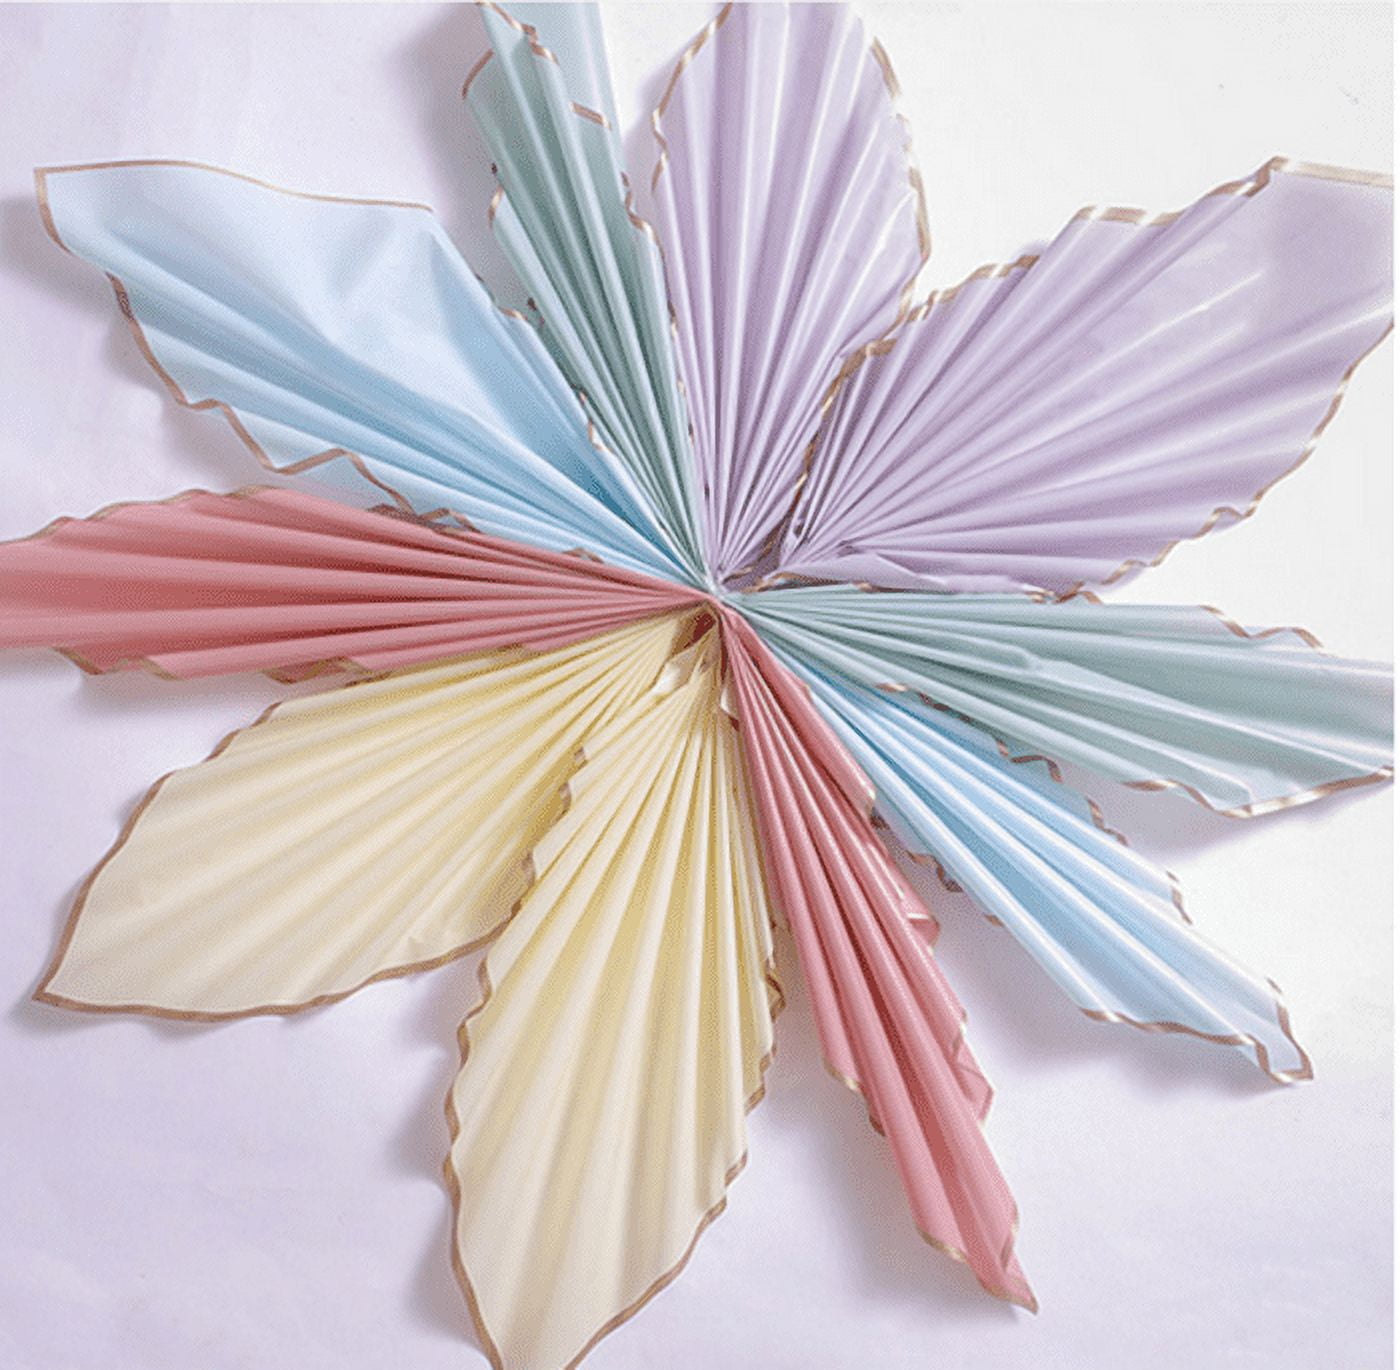  160 Sheets Mother's Day Waterproof Flower Wrapping